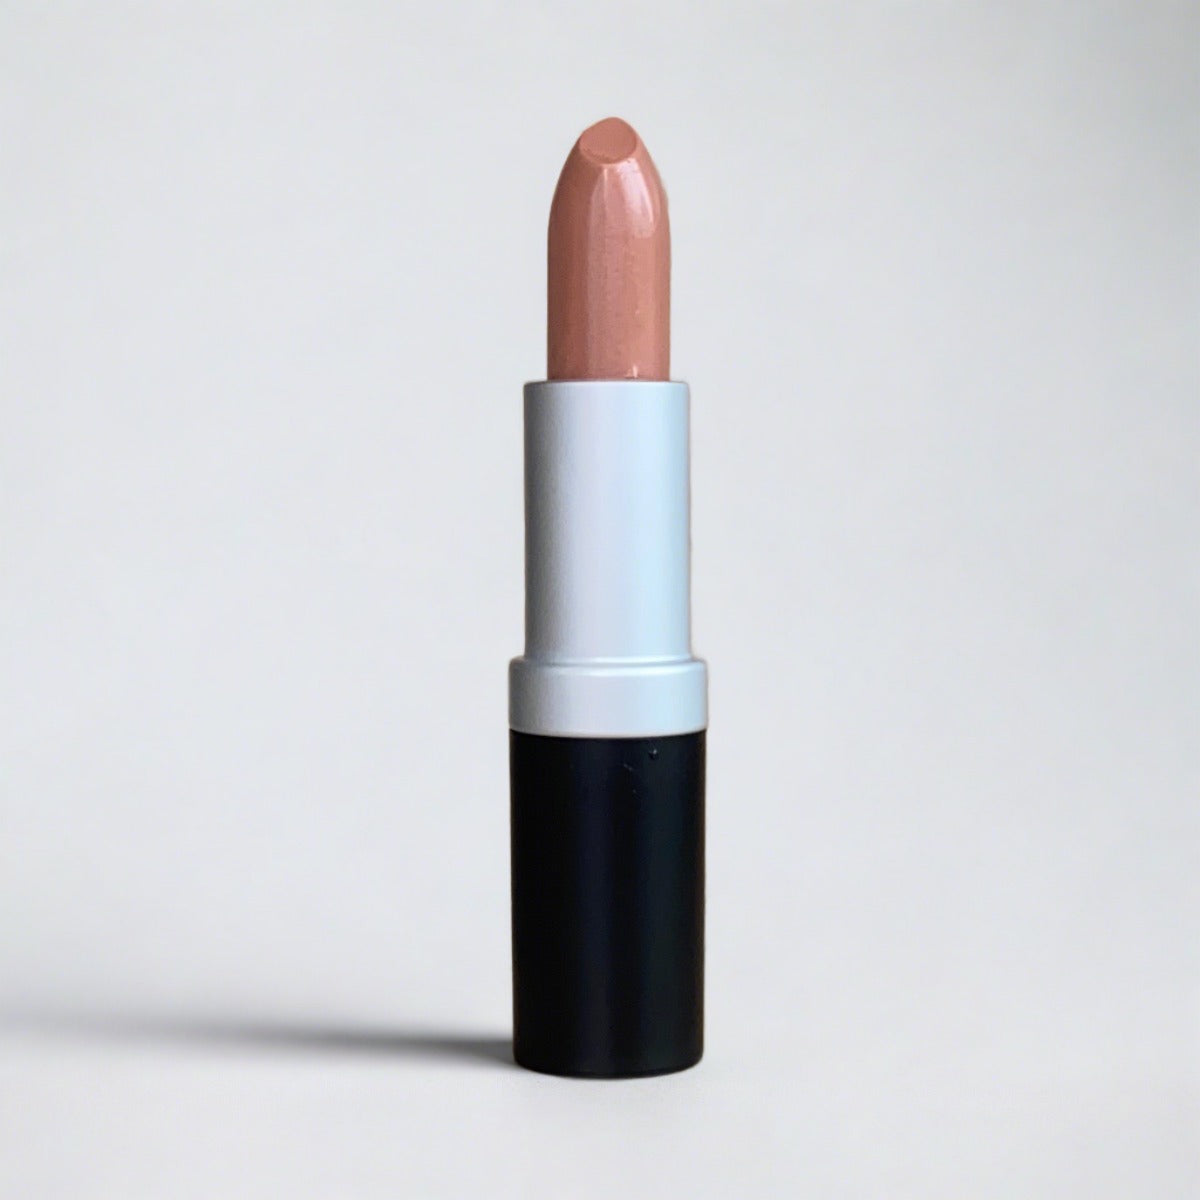  Image of Extremely Nude Lipstick, a nude pink lipstick, against a granite and rock background, symbolizing mindful beauty